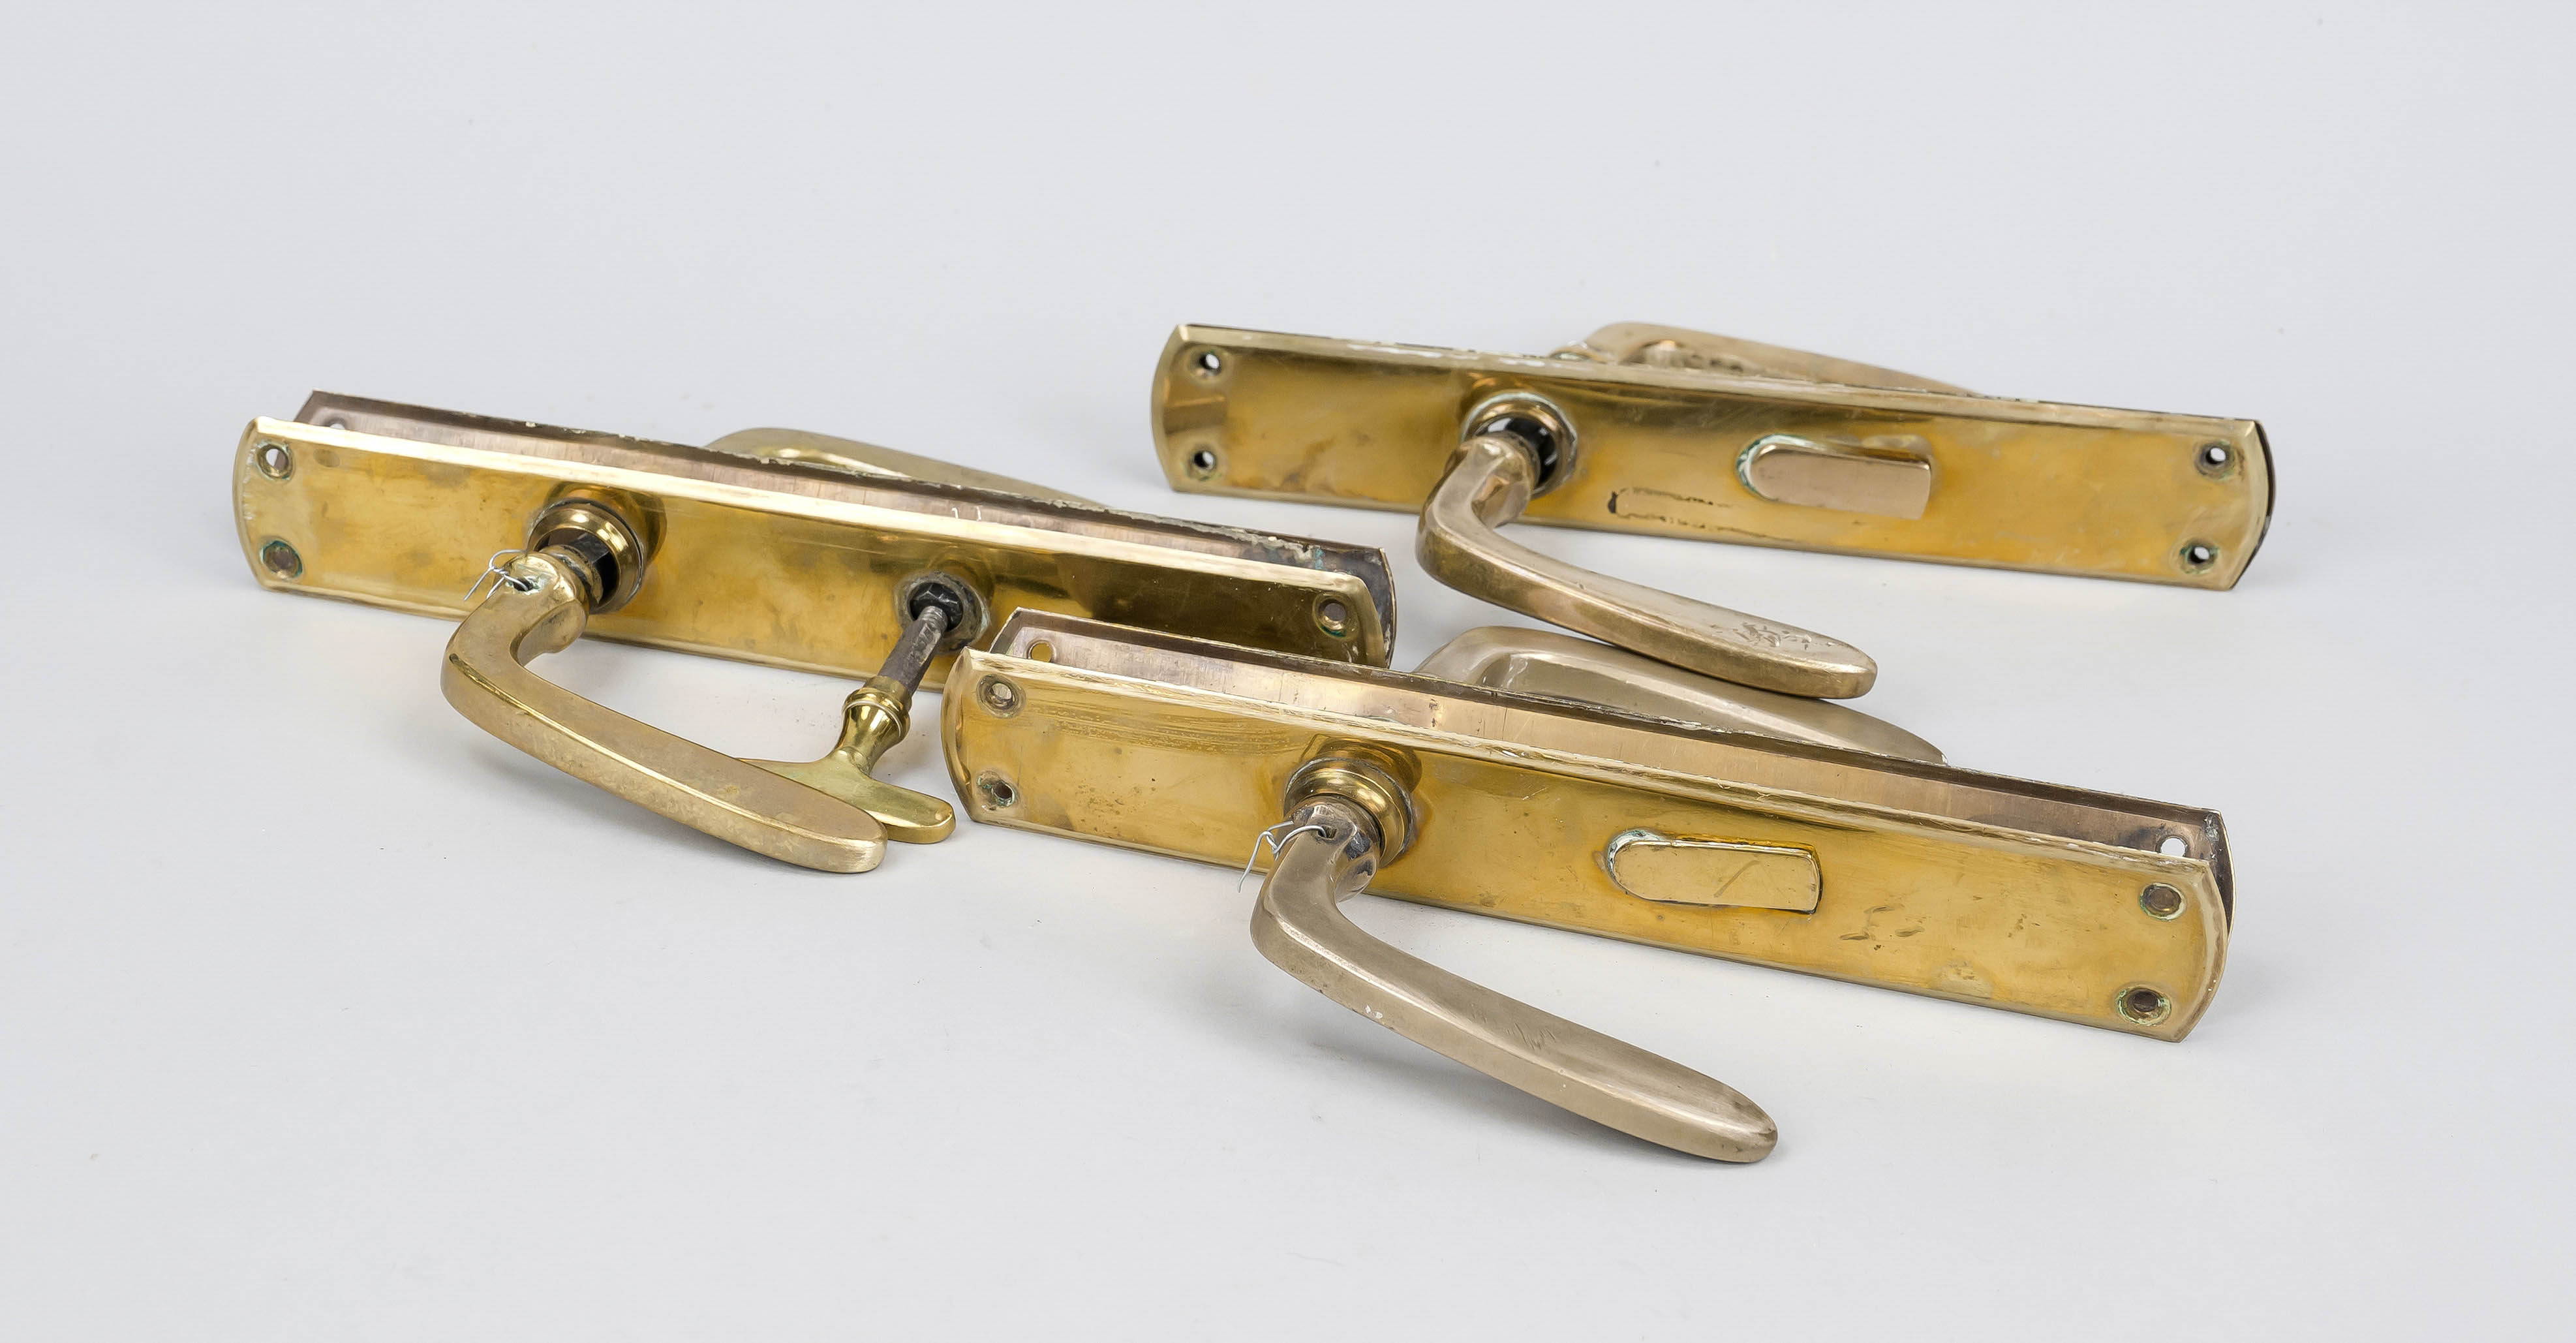 3 door sets, 19th/20th century, brass. Oblobed panels, slightly profiled handles. Slightly rubbed,